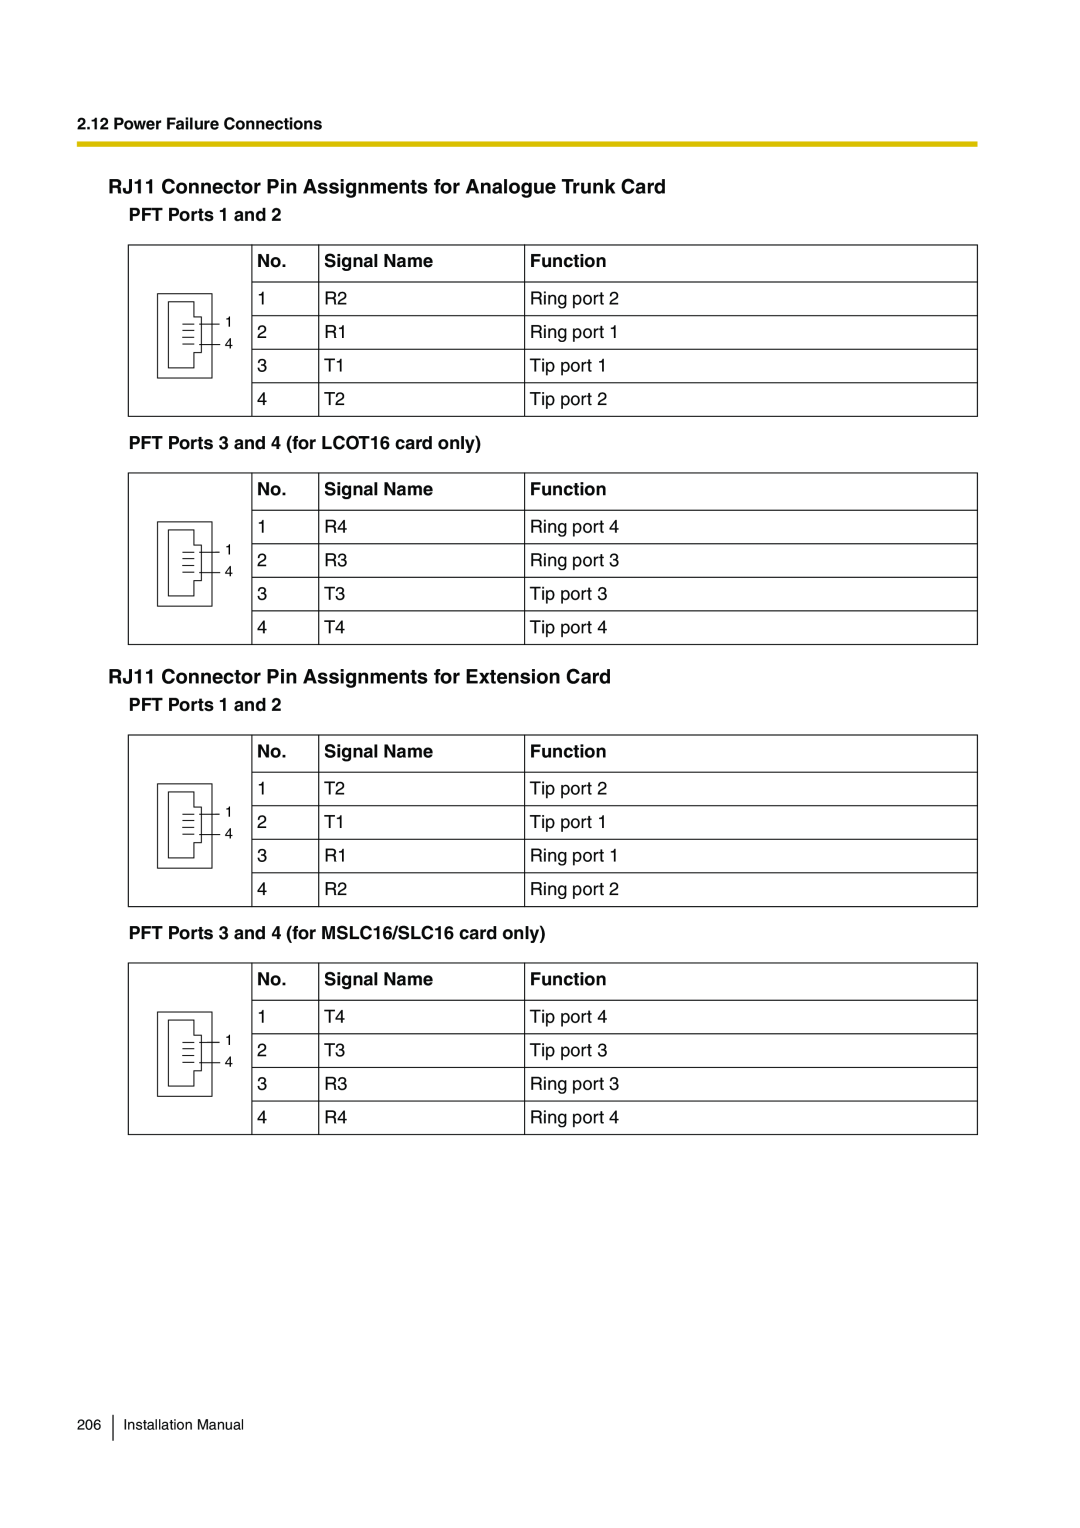 Panasonic KX-TDA100 RJ11 Connector Pin Assignments for Analogue Trunk Card, PFT Ports 1 and, Signal Name, Function 